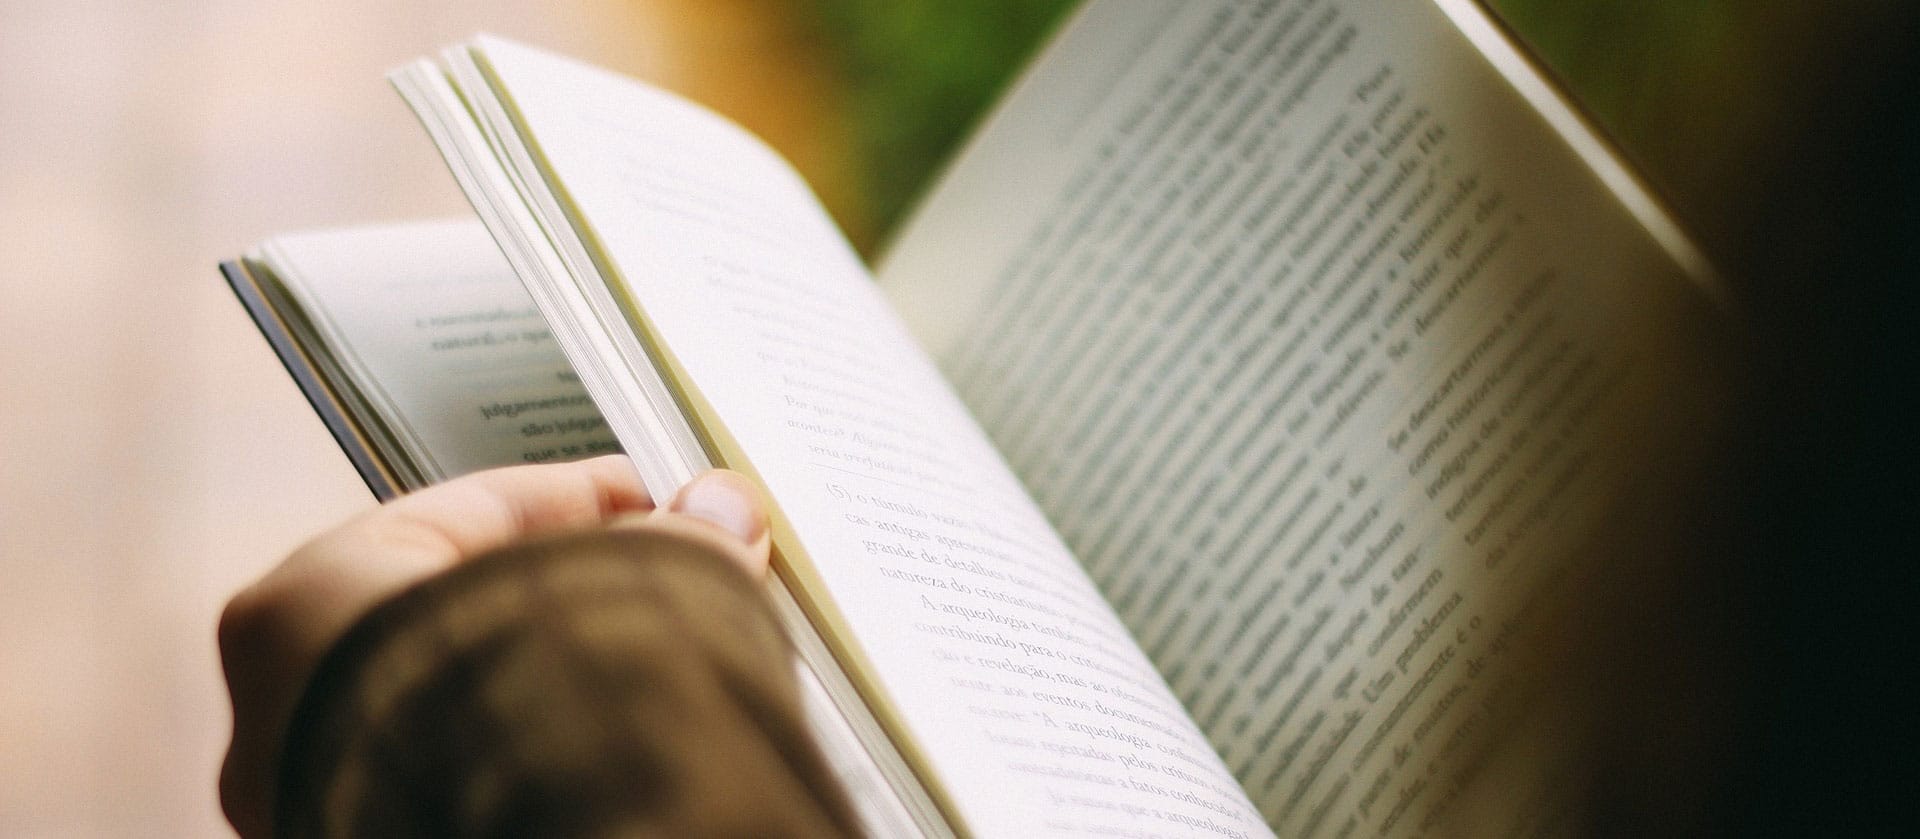 Why Marketing Leaders Need to Read Fiction